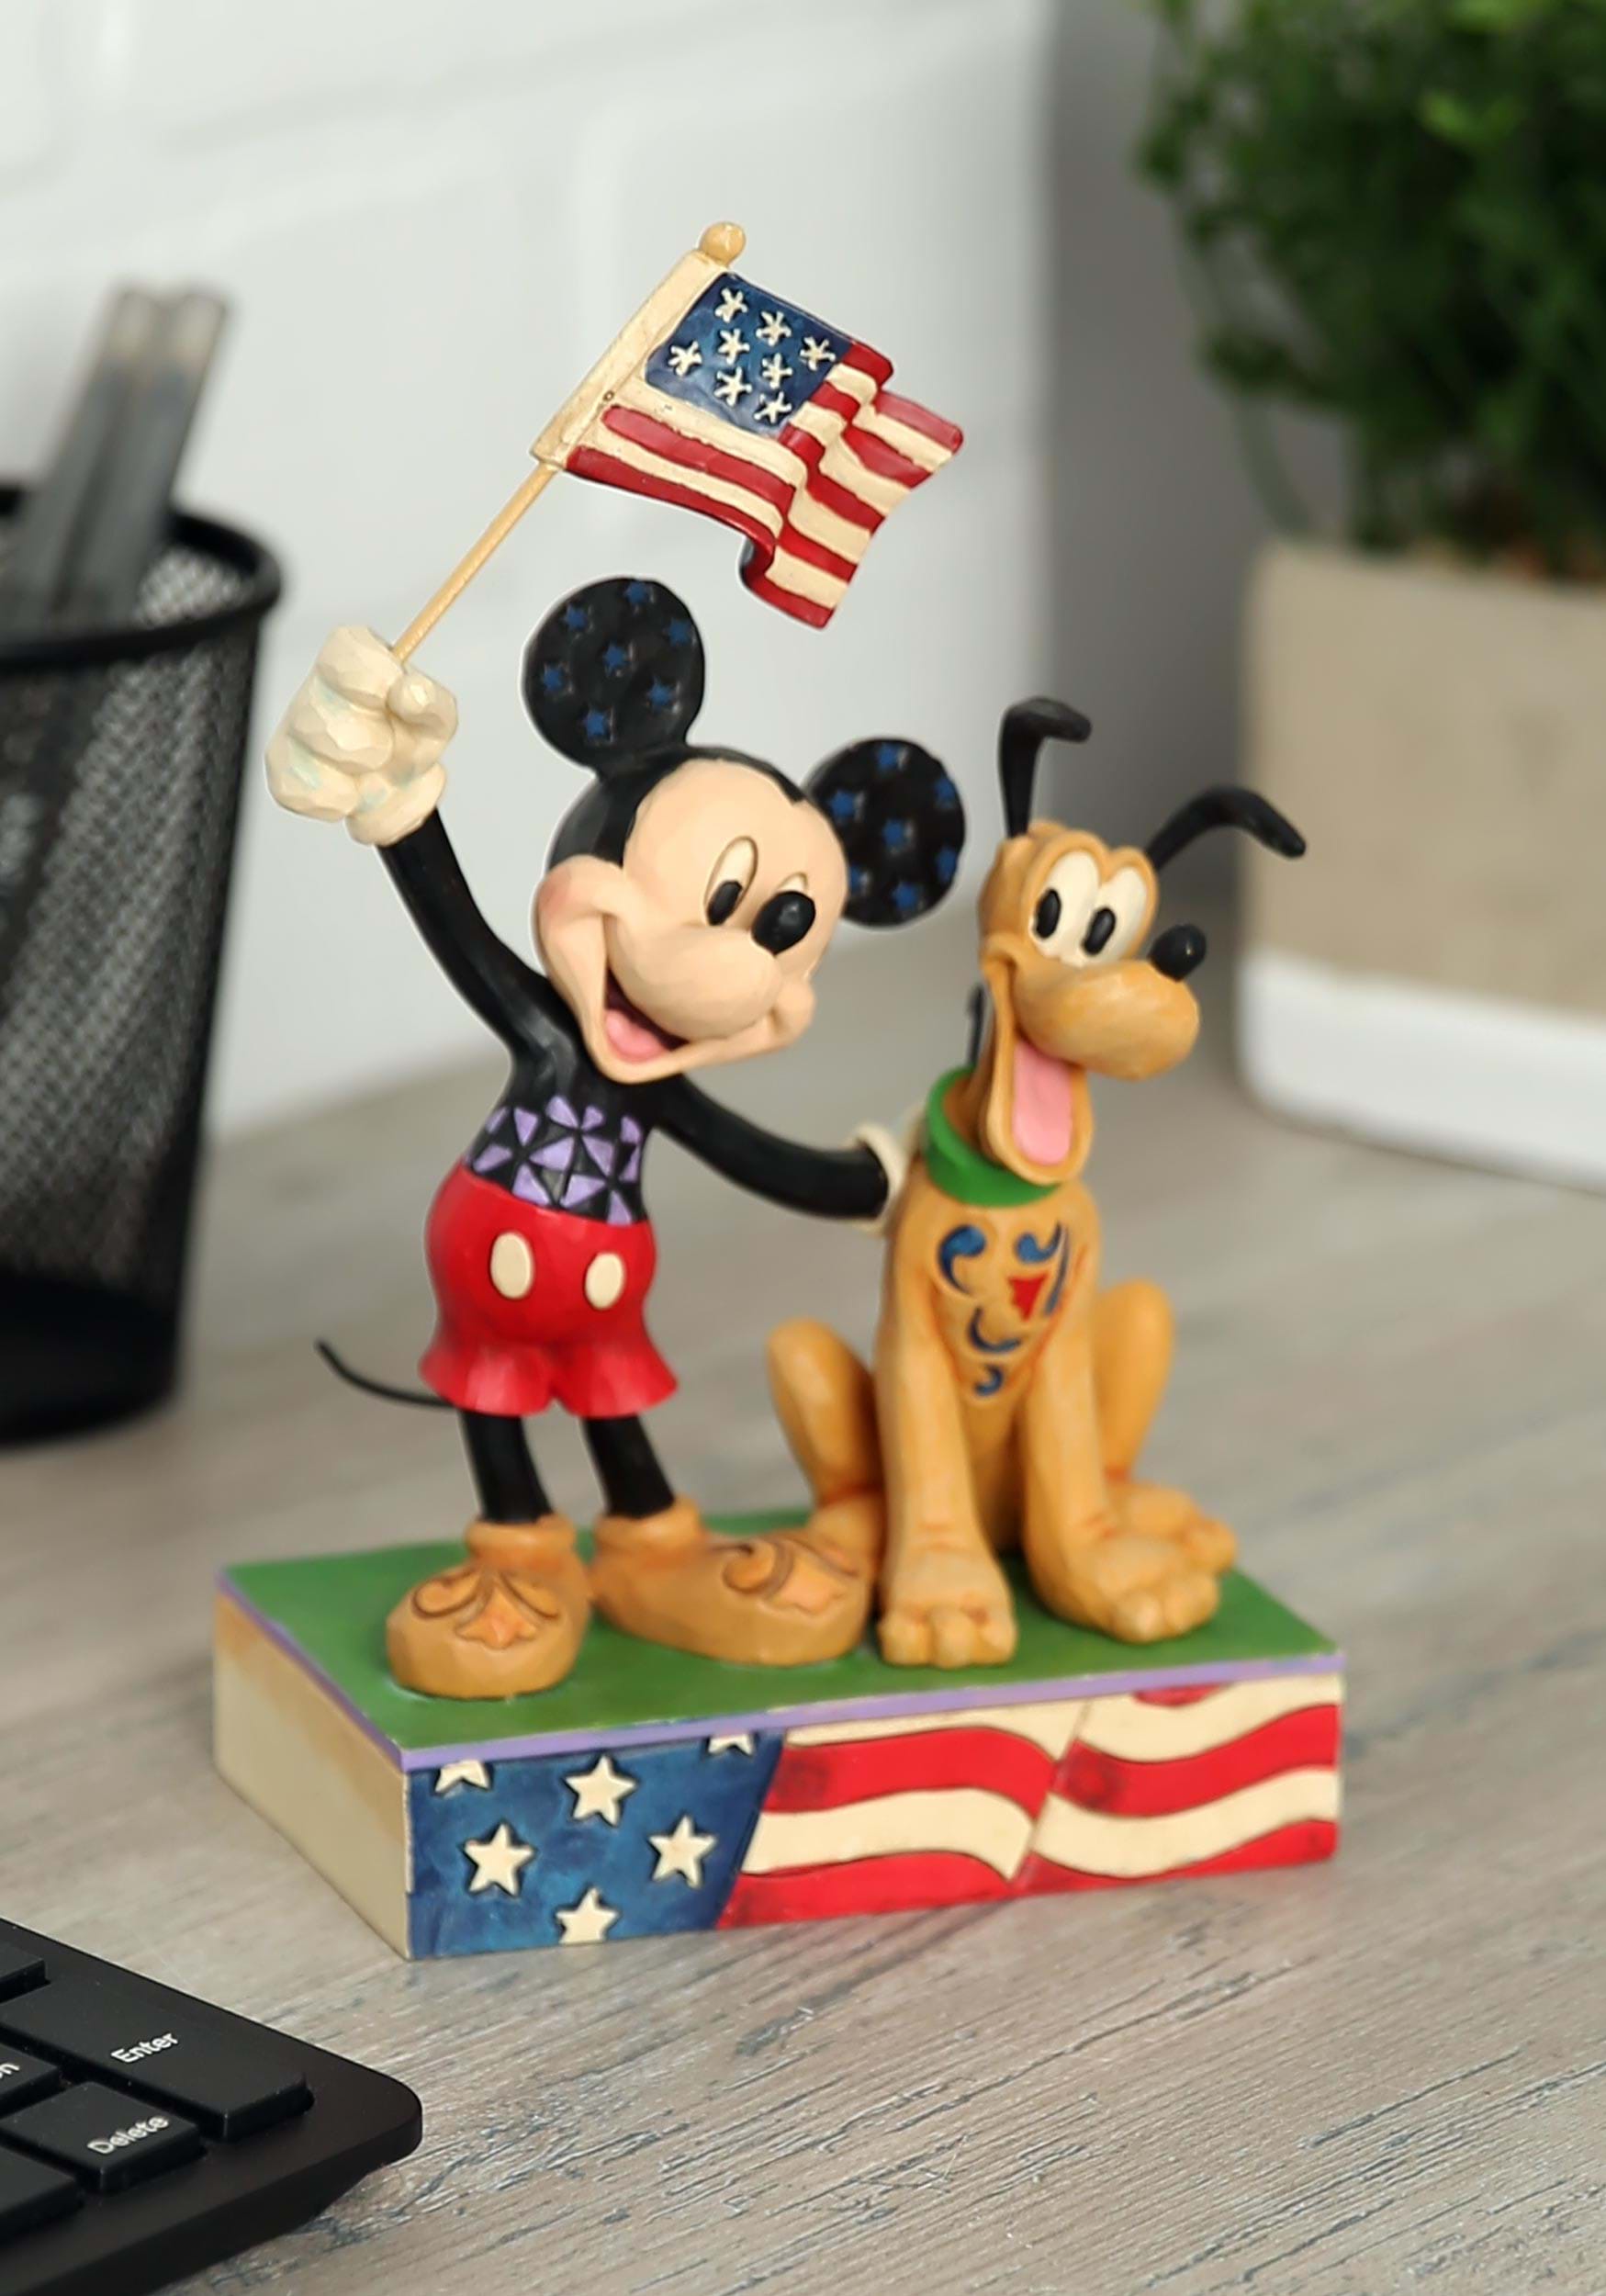 https://images.fun.com/products/65774/1-1/mickey-and-pluto-patriotic-statue.jpg